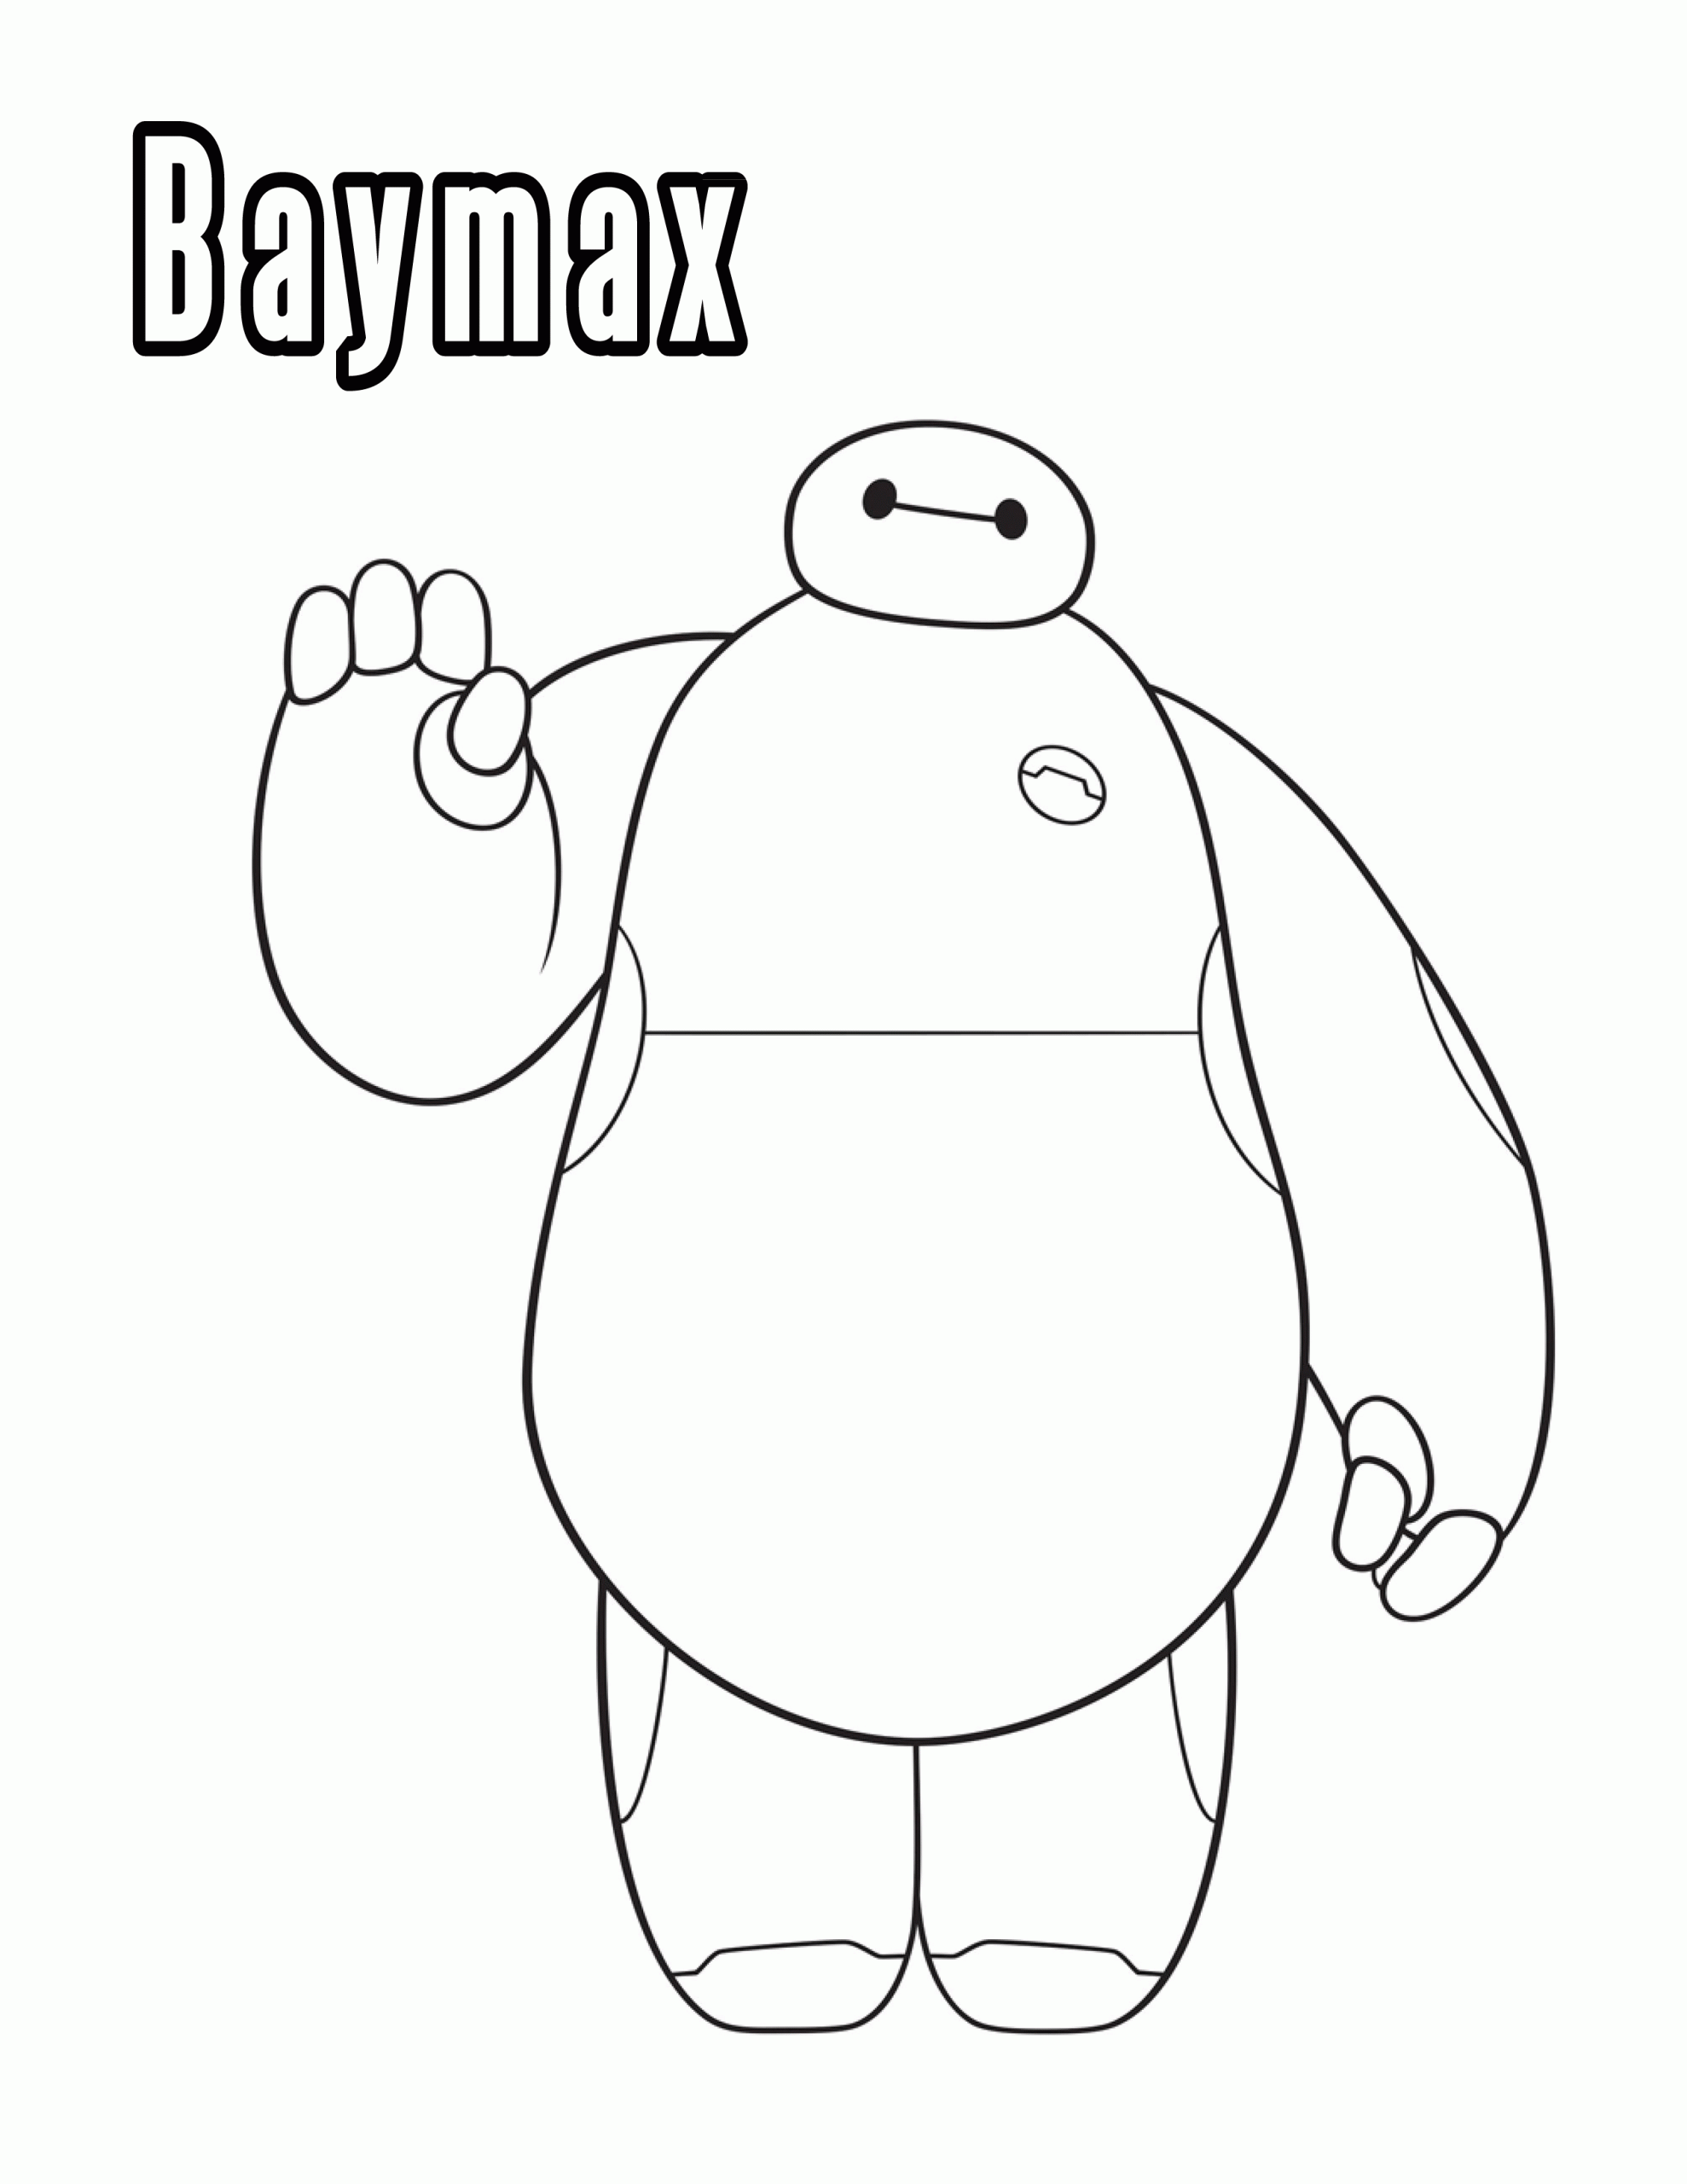 Baymax Only